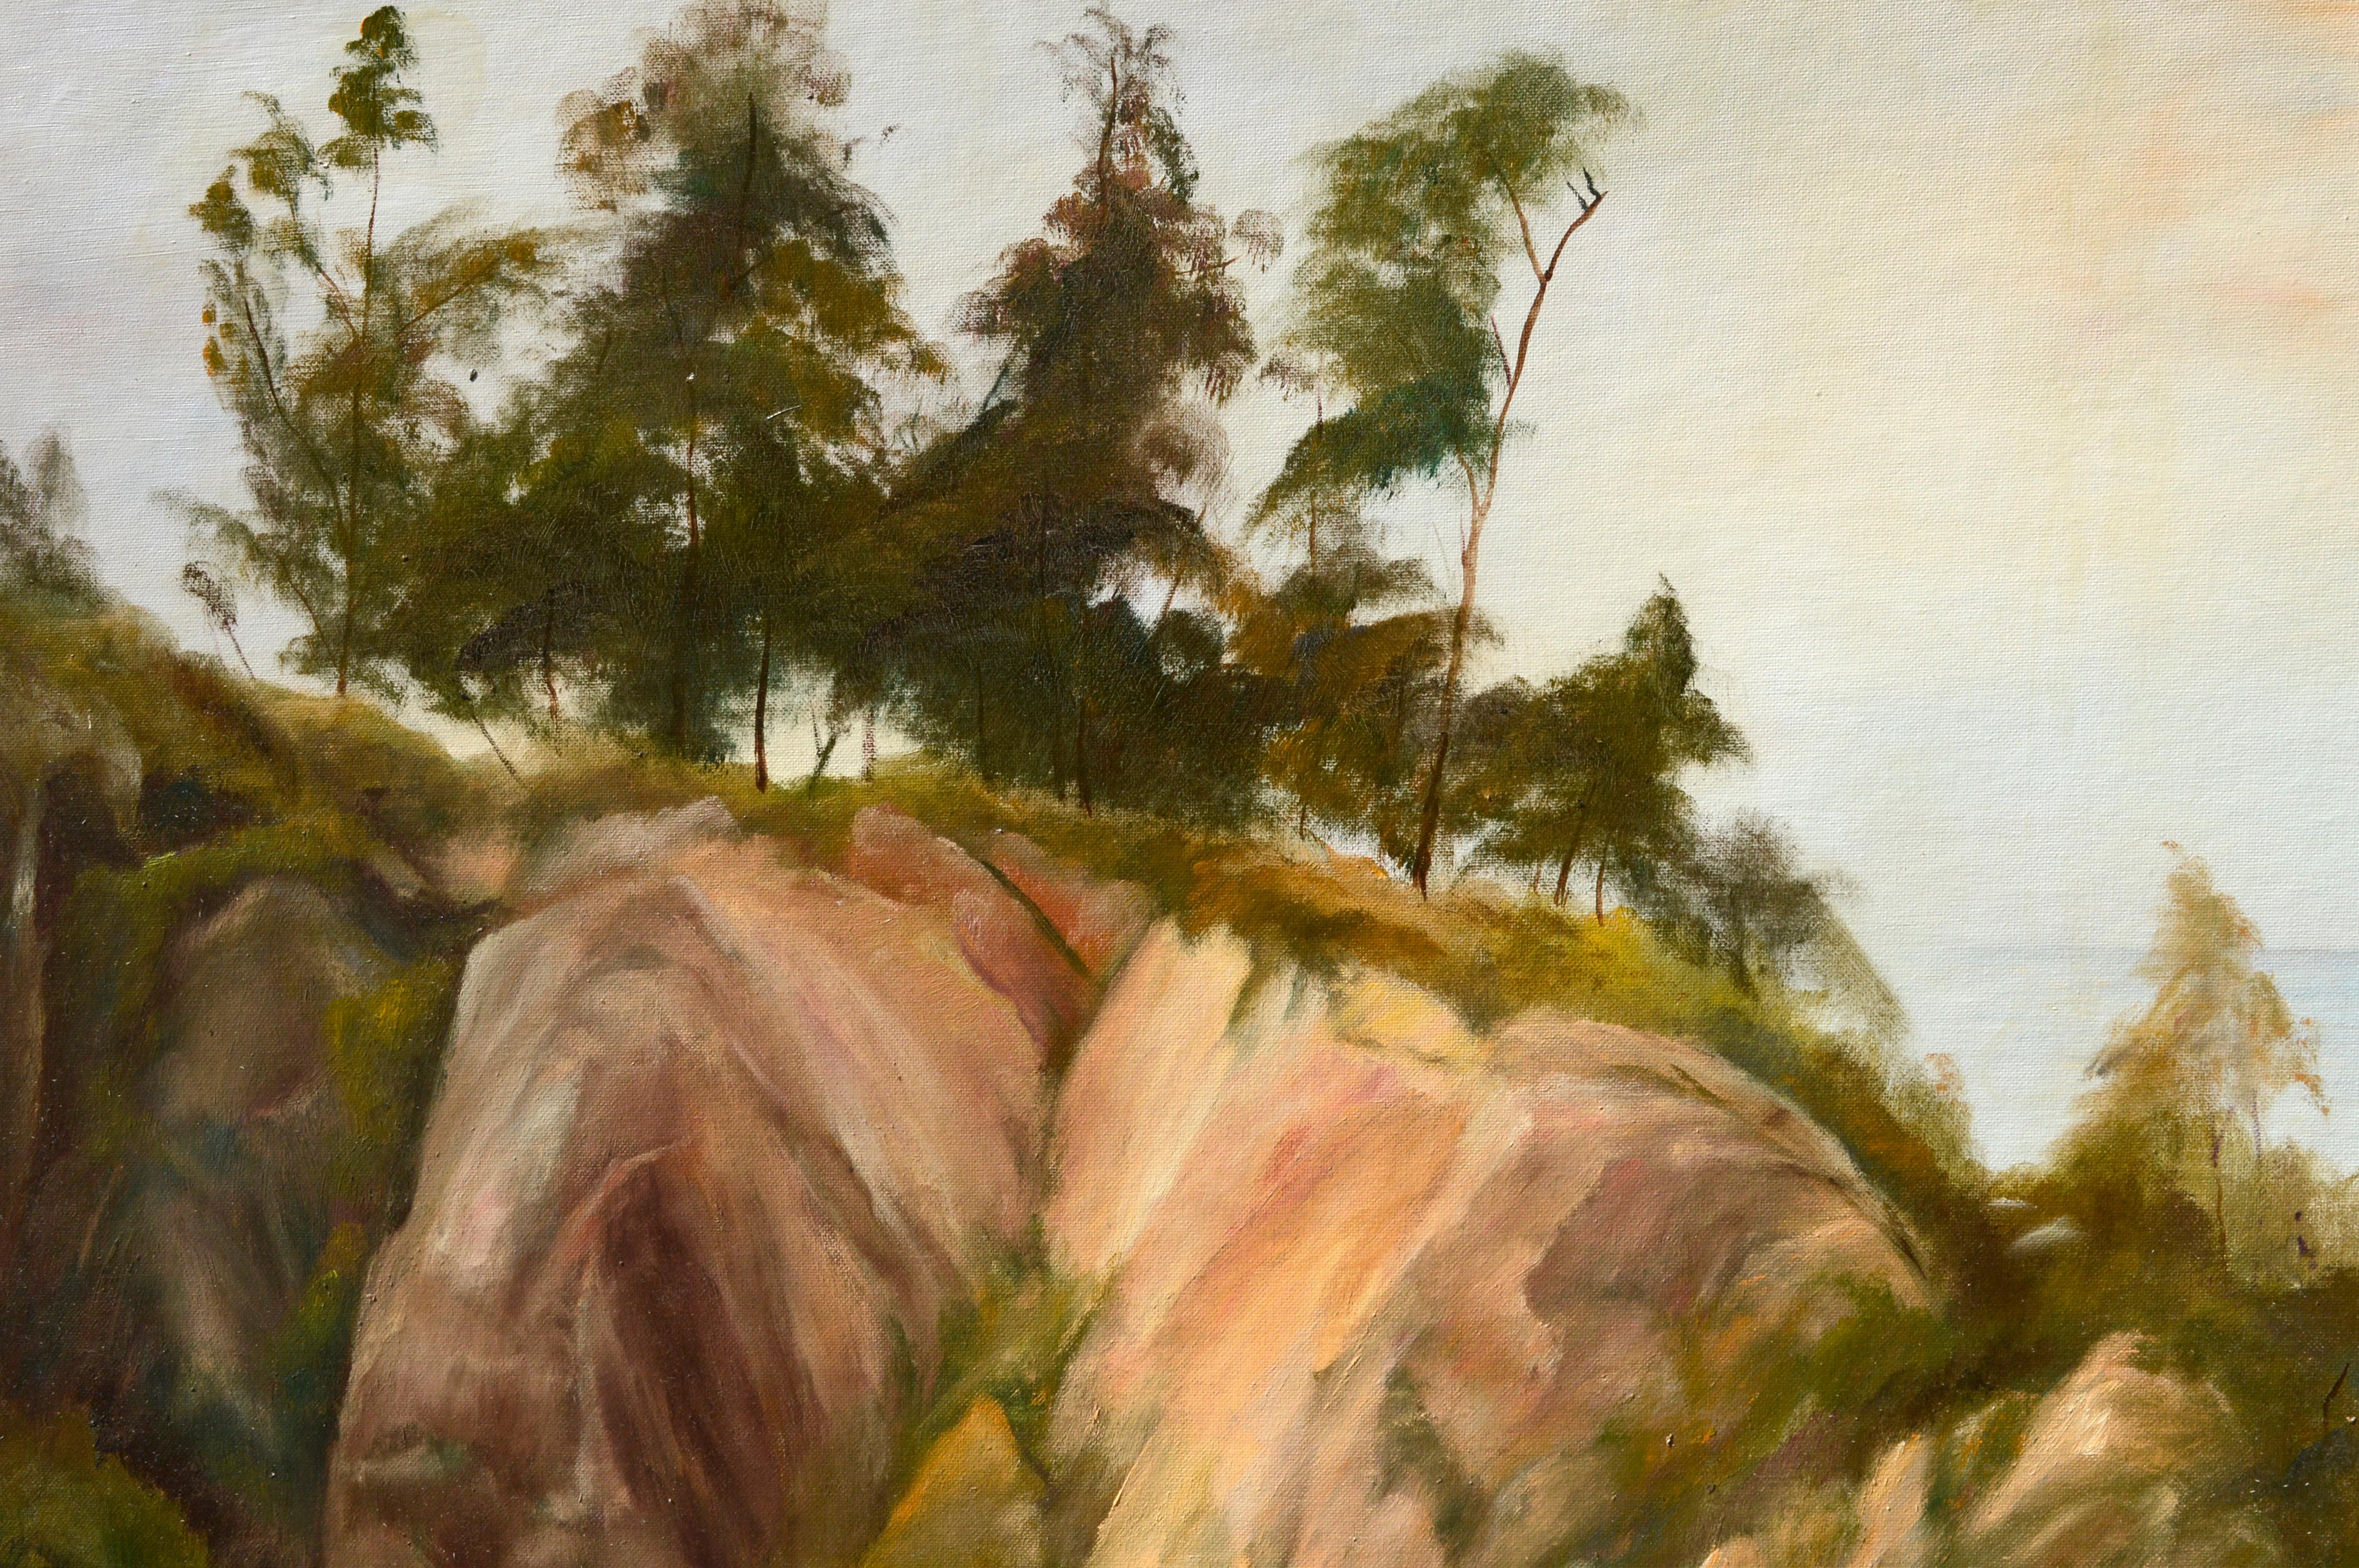 Trees at the Top of the Big Sur Coastal Bluffs Landscape - Oil on Artists Board  - American Impressionist Painting by Kenneth Lucas